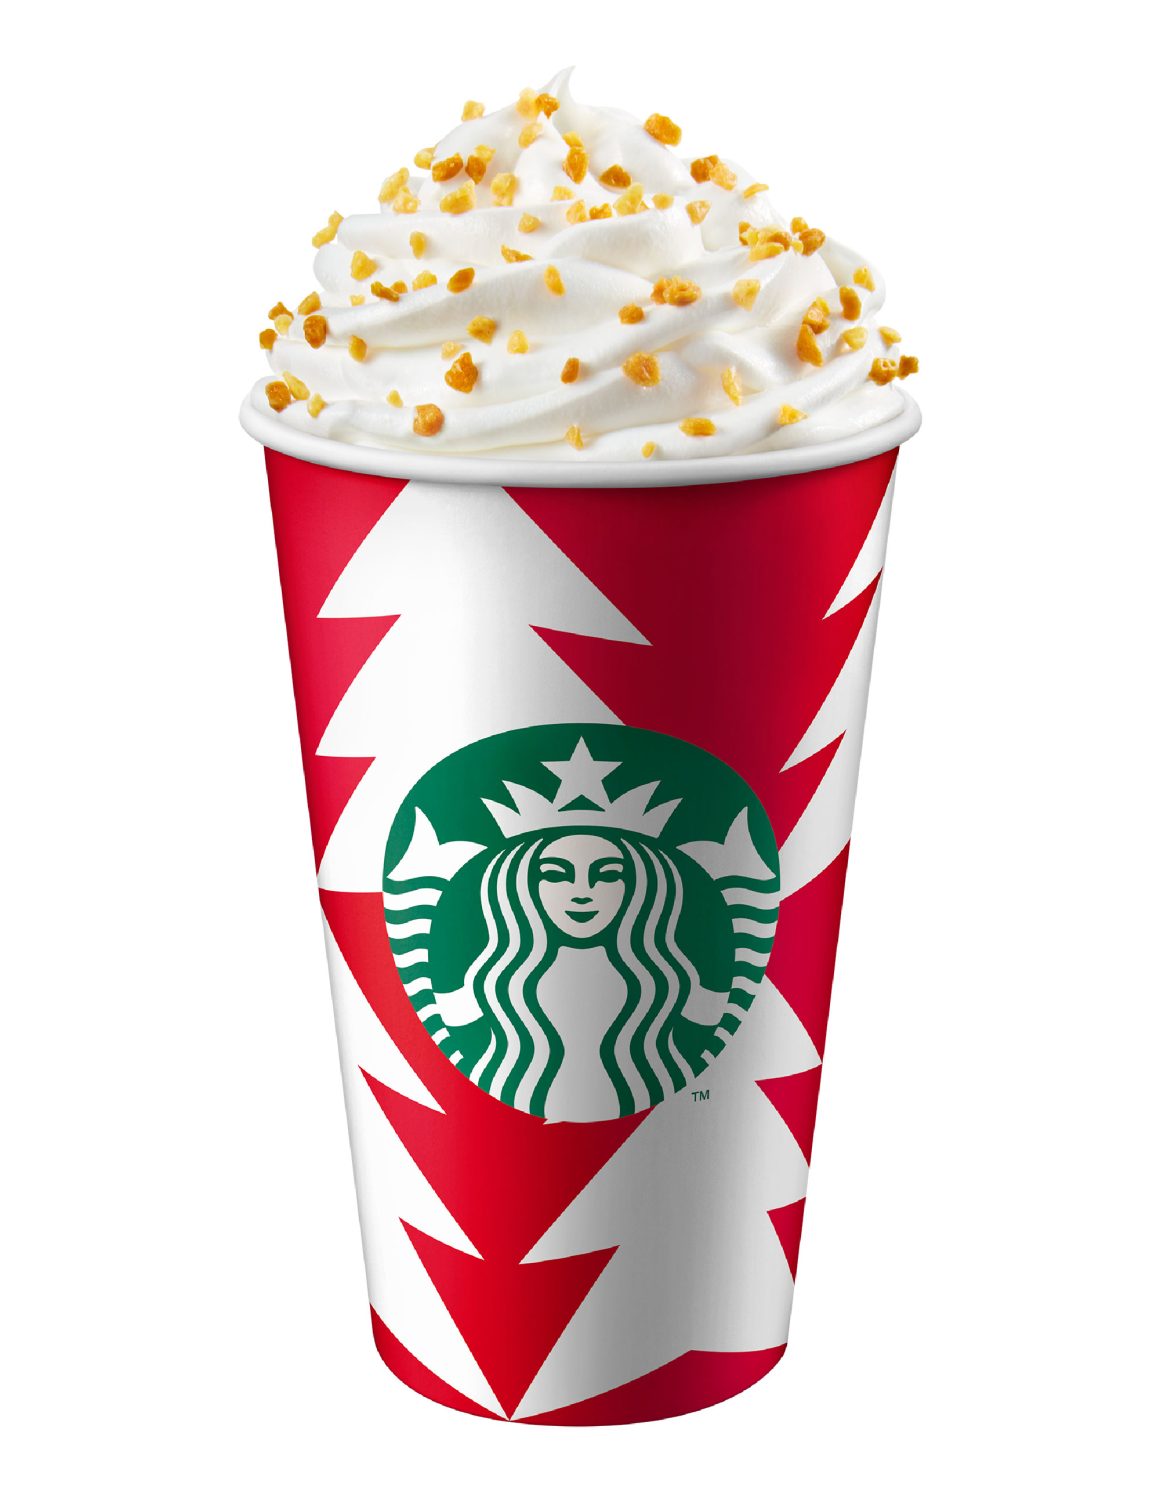 Starbucks New Zealand - Which Xmas favourite will you be enjoying today?  Gingerbread Latte, Toffee Nut Crunch Latte or Peppermint Mocha? Comment  below. #StarbucksNZ #CarryTheMerry